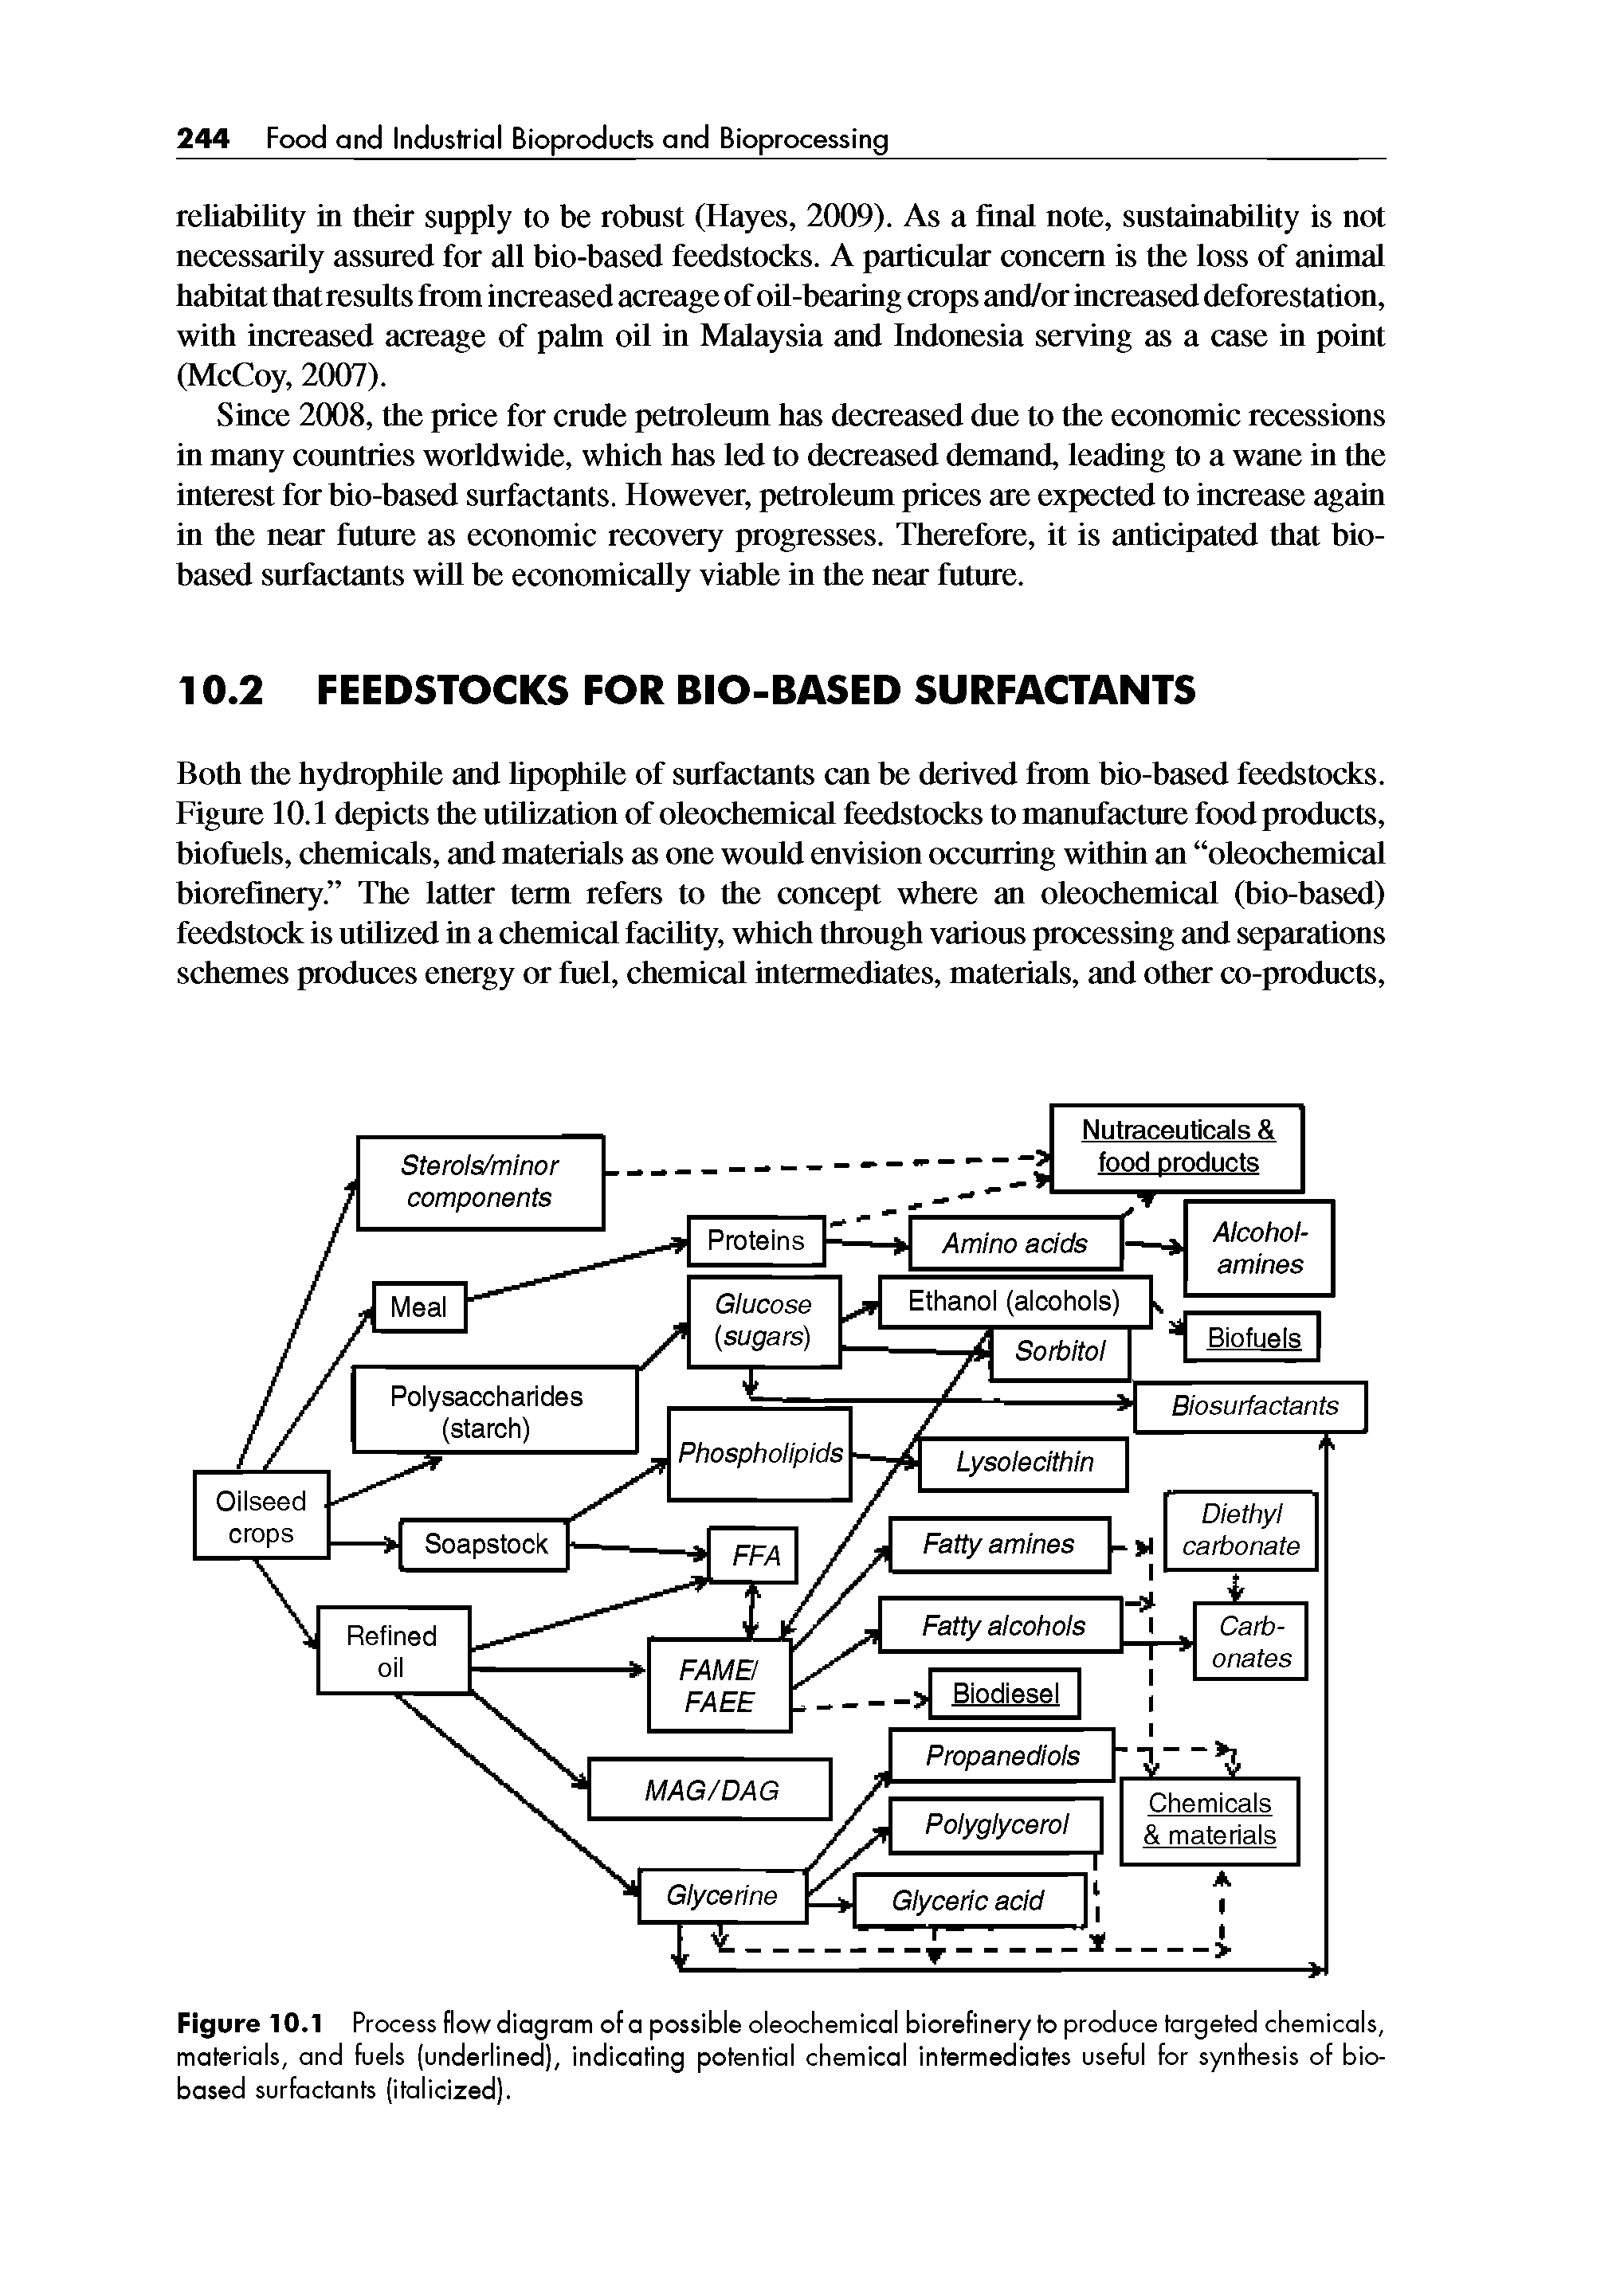 Figure 10.1 Process flow diagram of a possible oleochemical biorefinery to produce targeted chemicals, materials, and fuels (underlined), indicating potential chemical intermediates useful for synthesis of biobased surfactants (italicized).